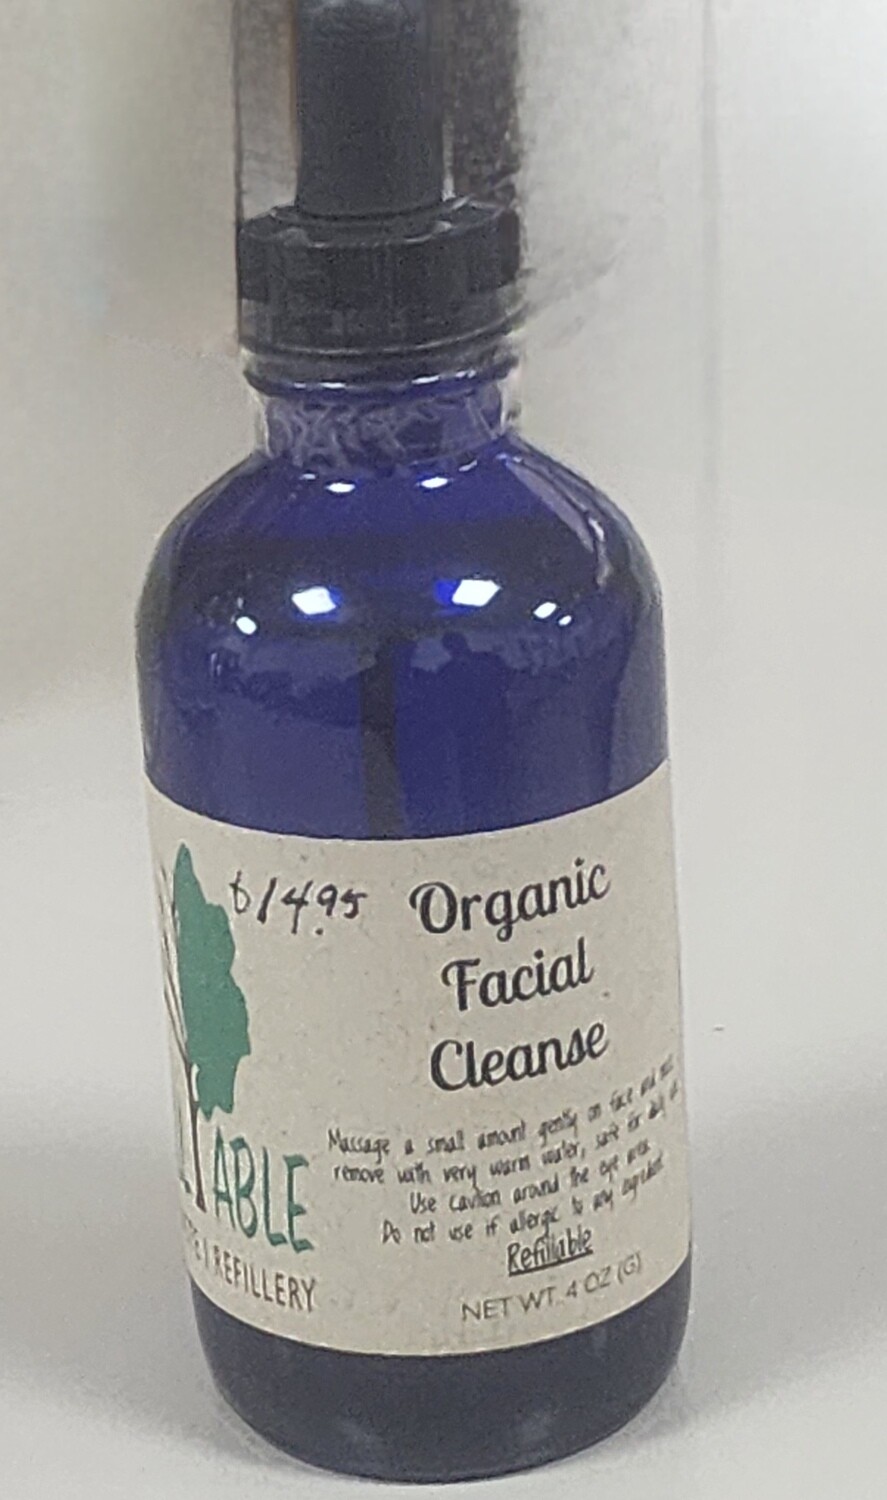 Refill-Able Organic Facial Cleanser (for refills by the oz)